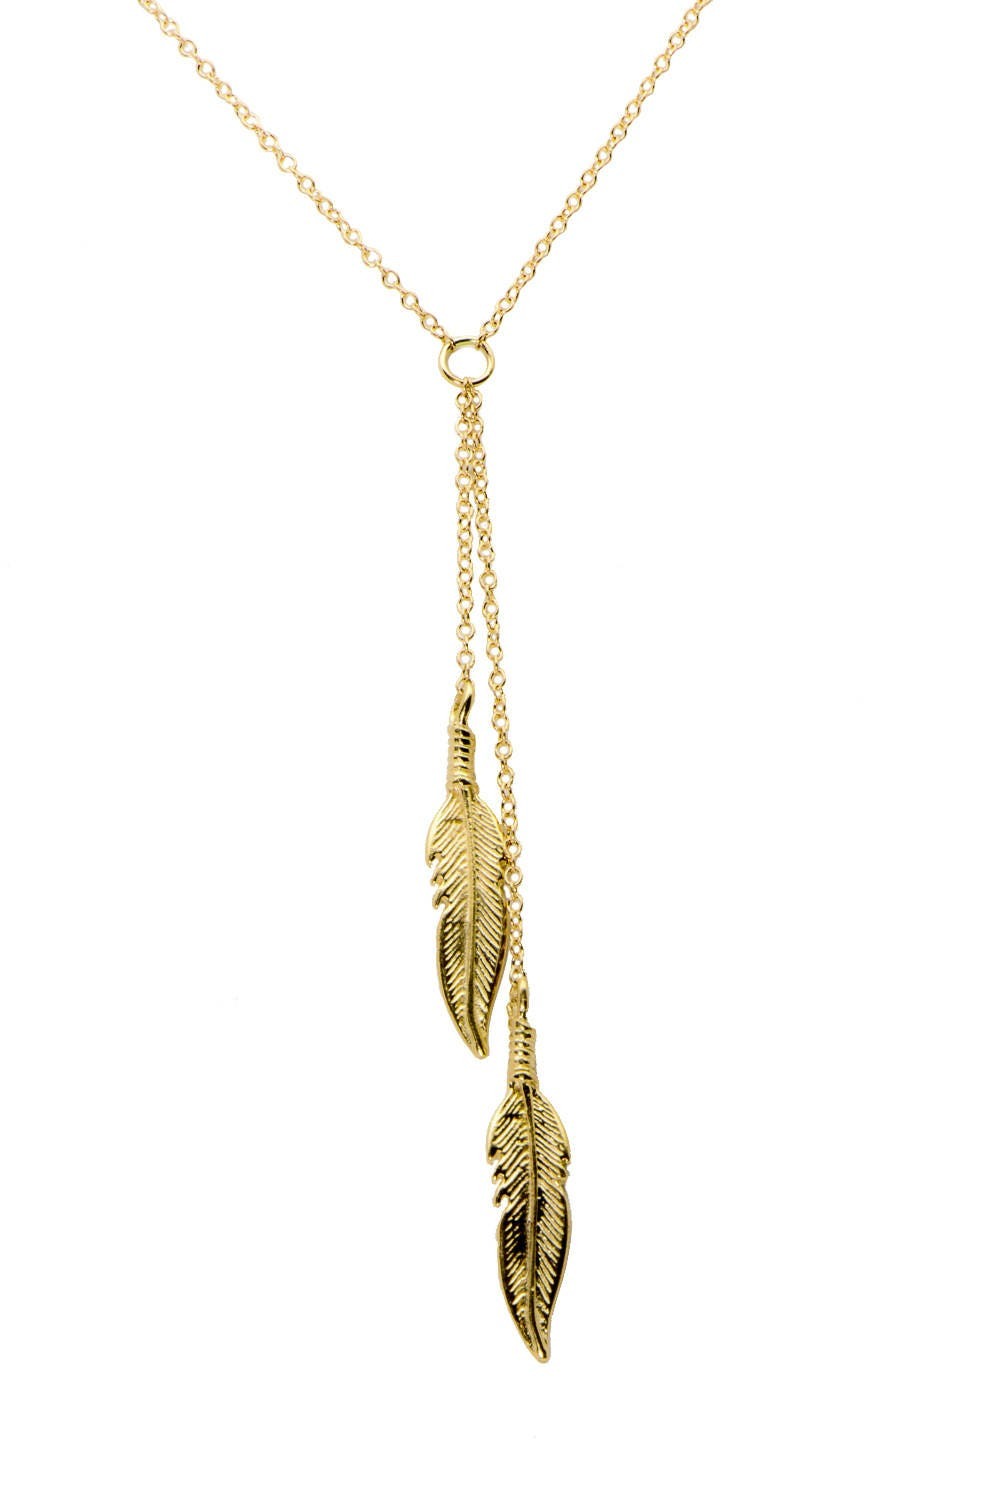 14k Gold Feather Lariat Necklace